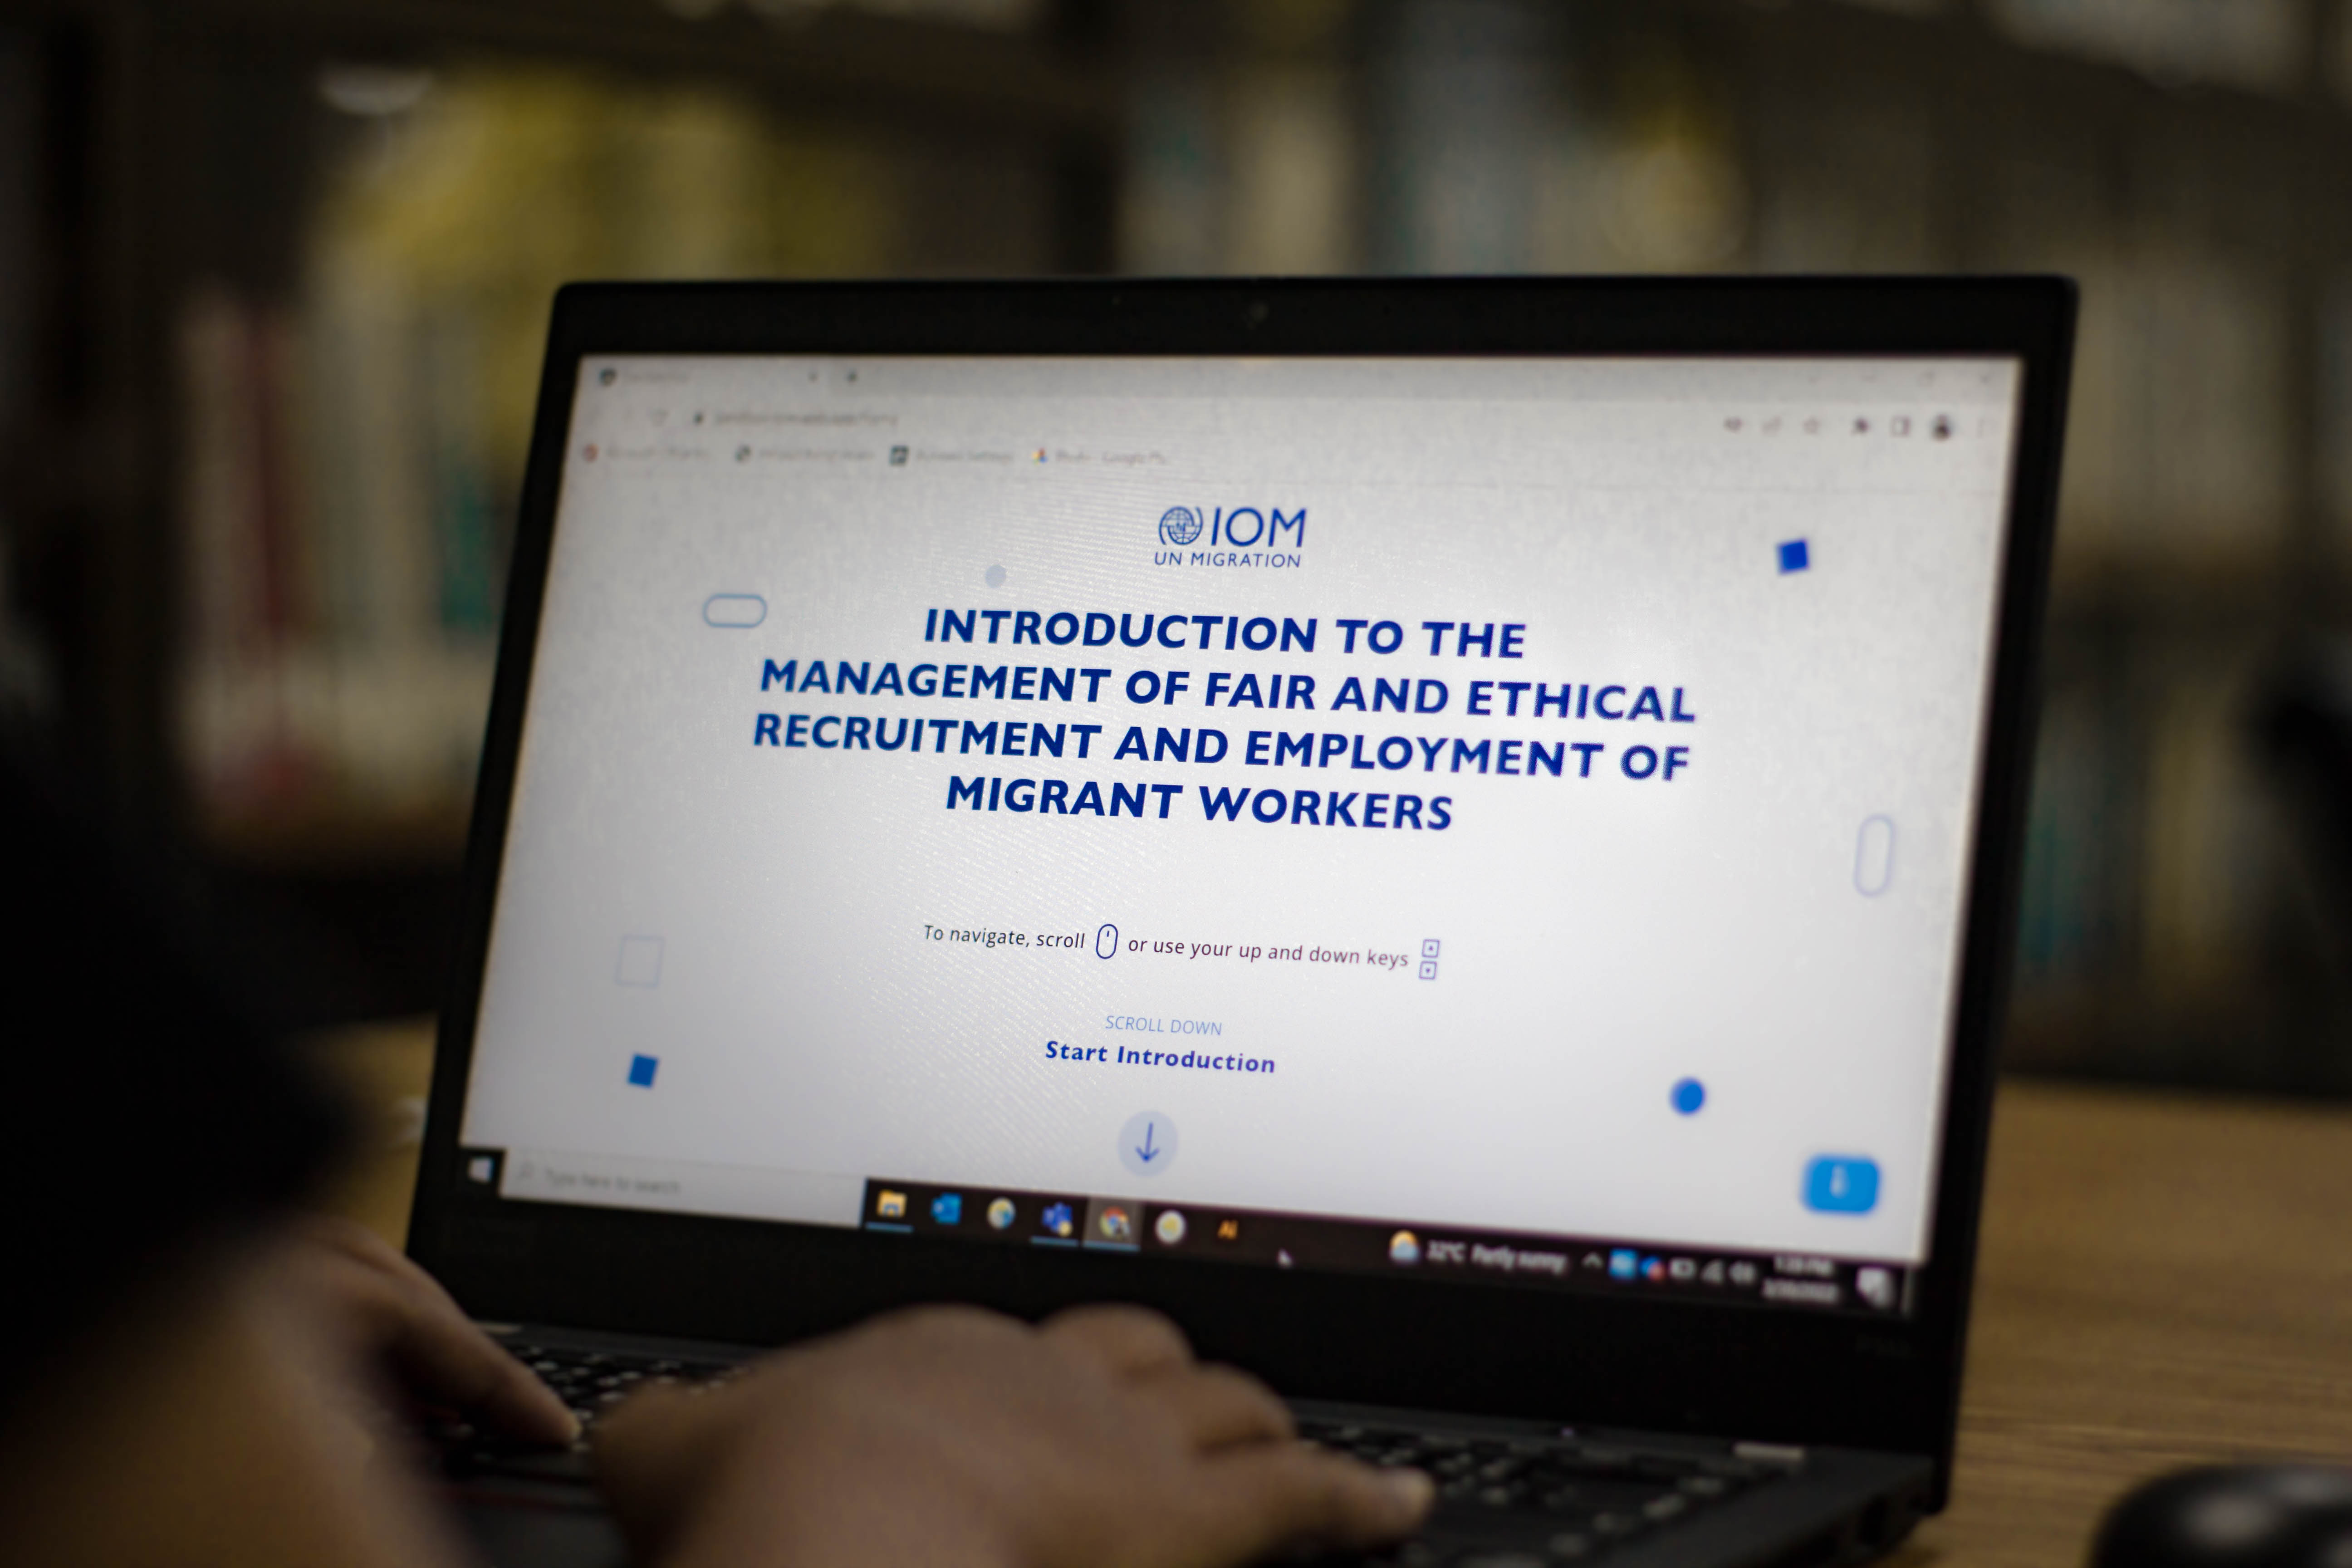 How to Recruit and Employ Migrant Workers Responsibly: New IOM E-course